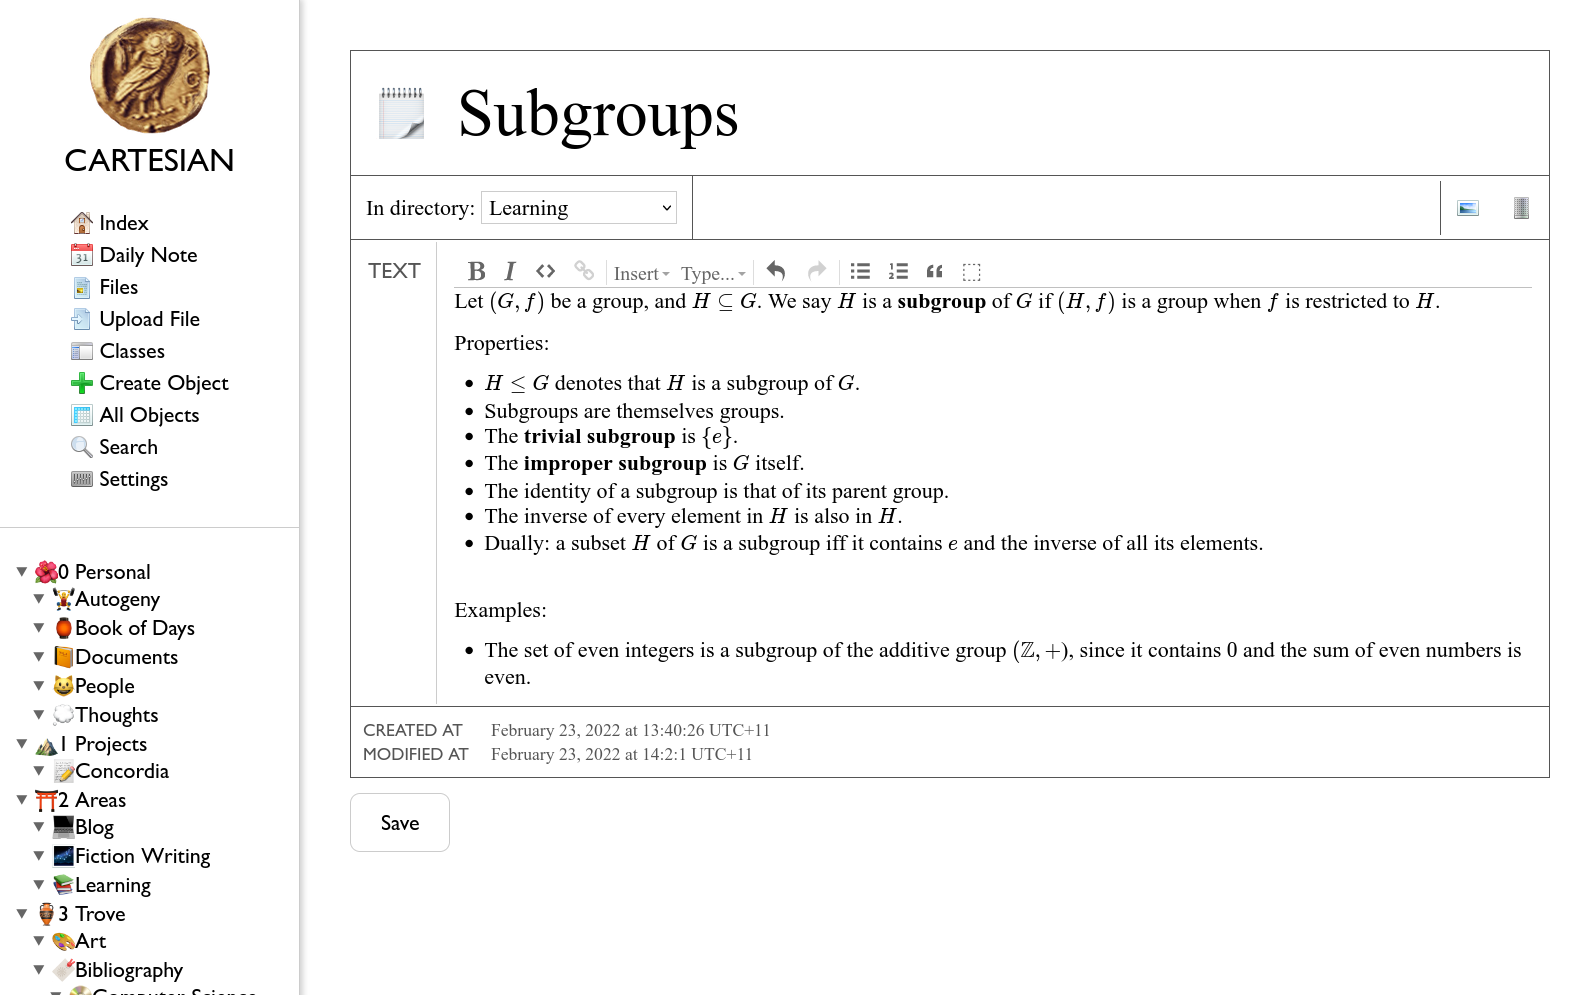 Another screenshot with notes on group theory.